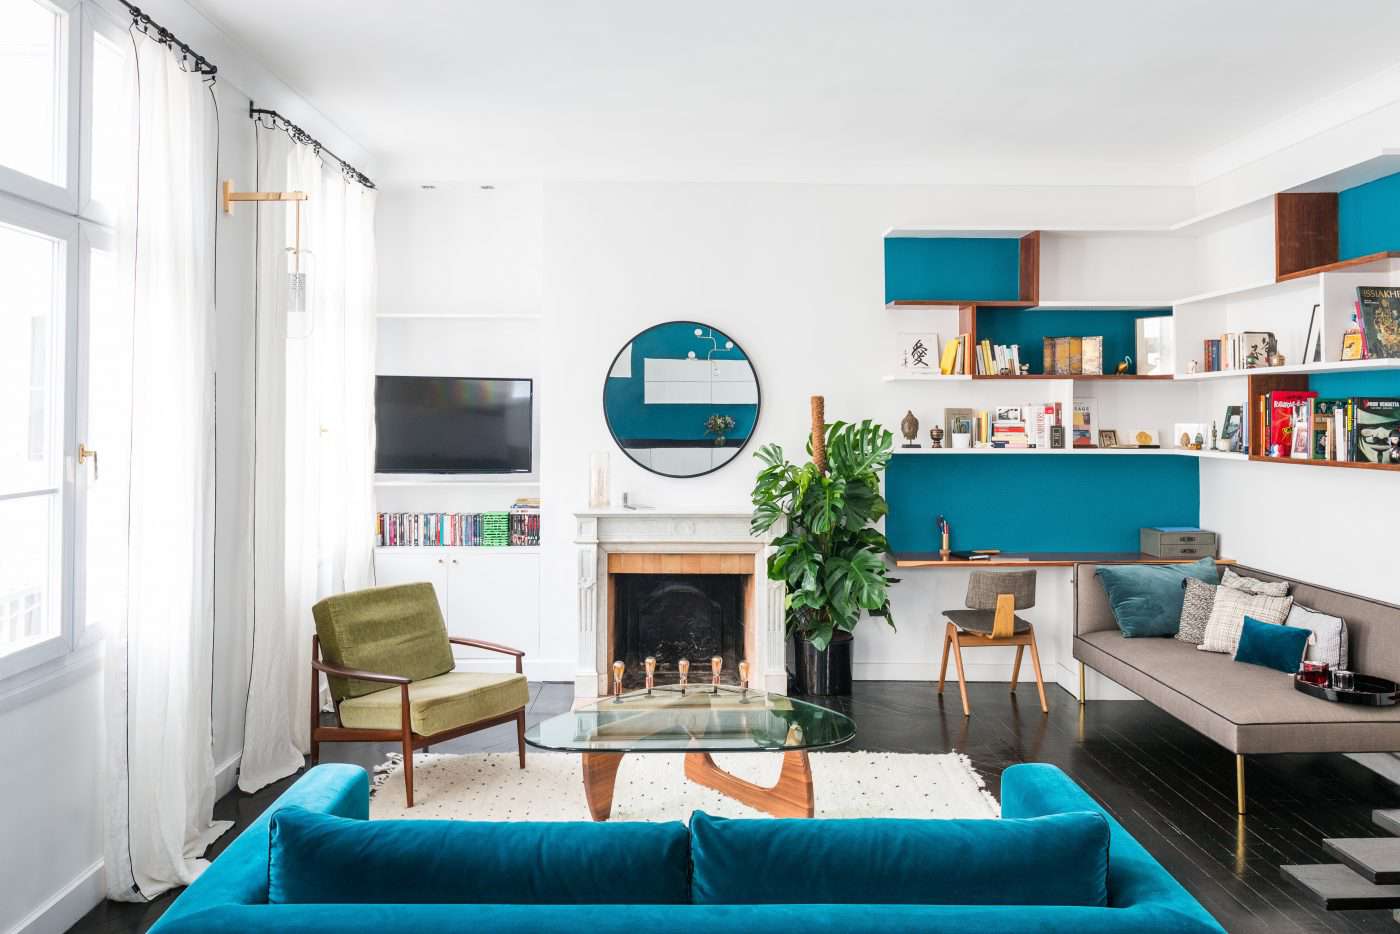 Teal and White living room